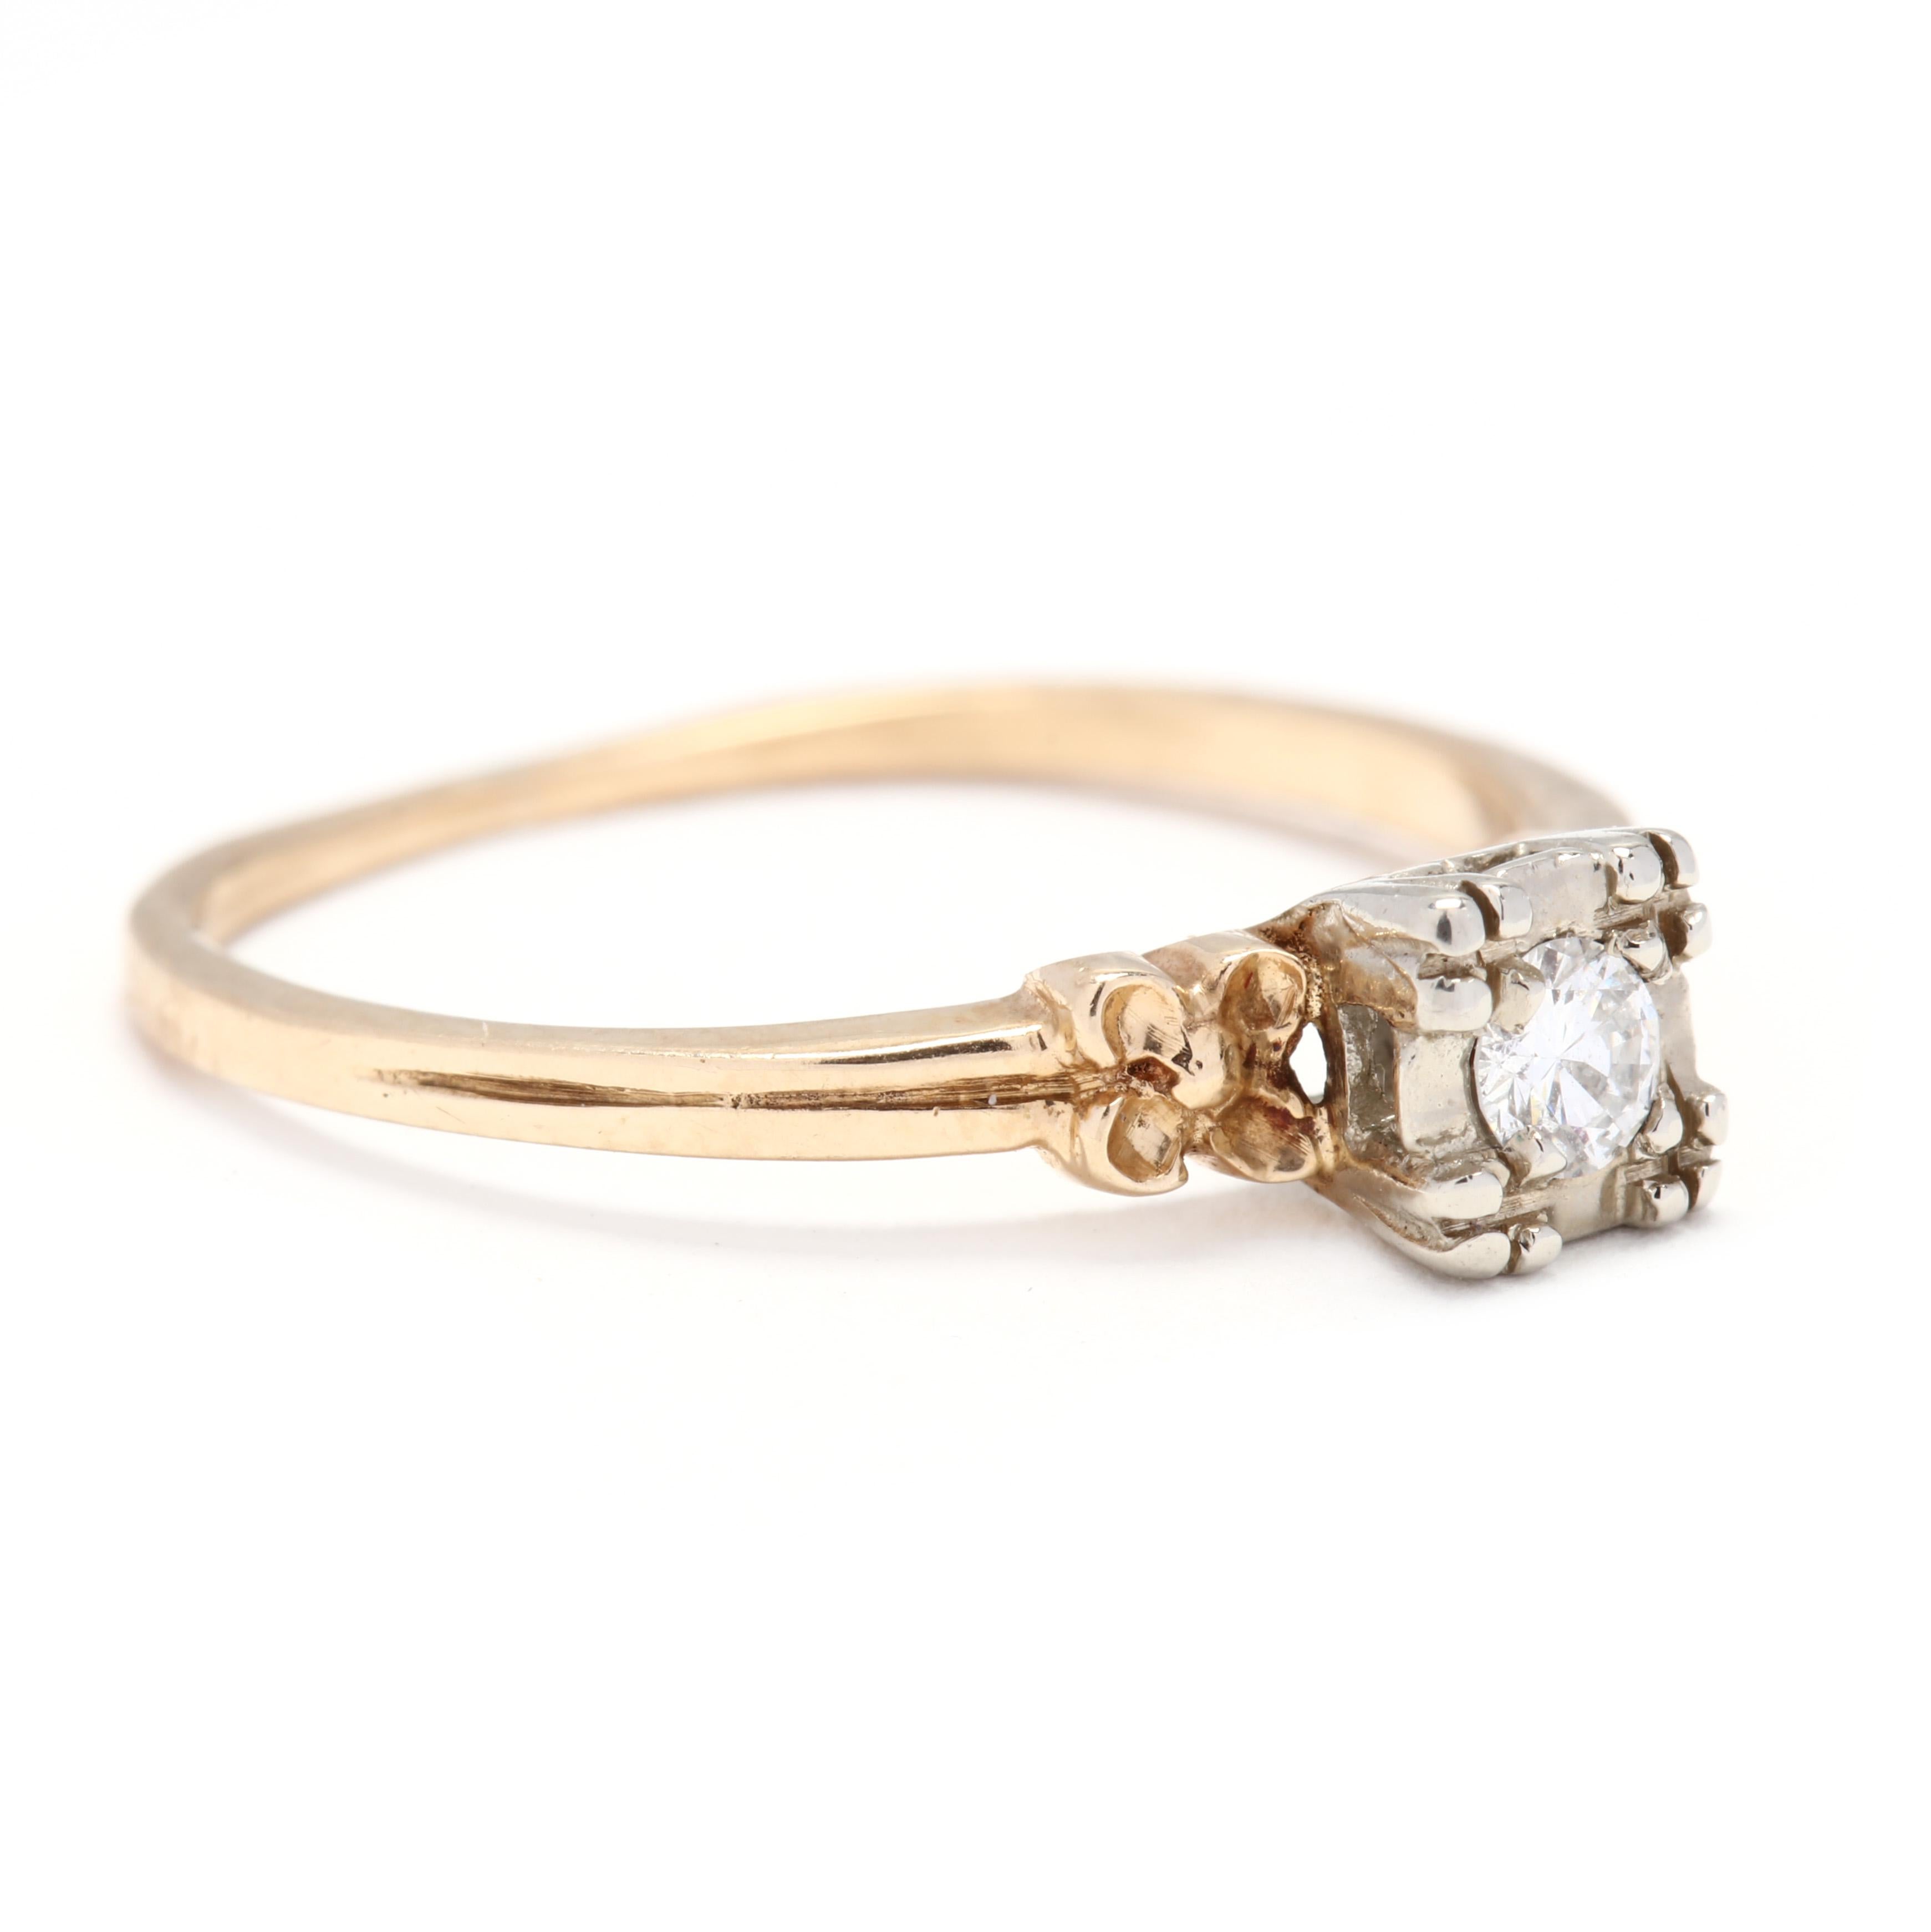 A Retro 14 karat bi-color gold diamond engagement ring. This ring features a square mounting set with a full cut round diamond weighing approximately .12 carat with an engraved floral motif on either side and a ridged slightly tapered